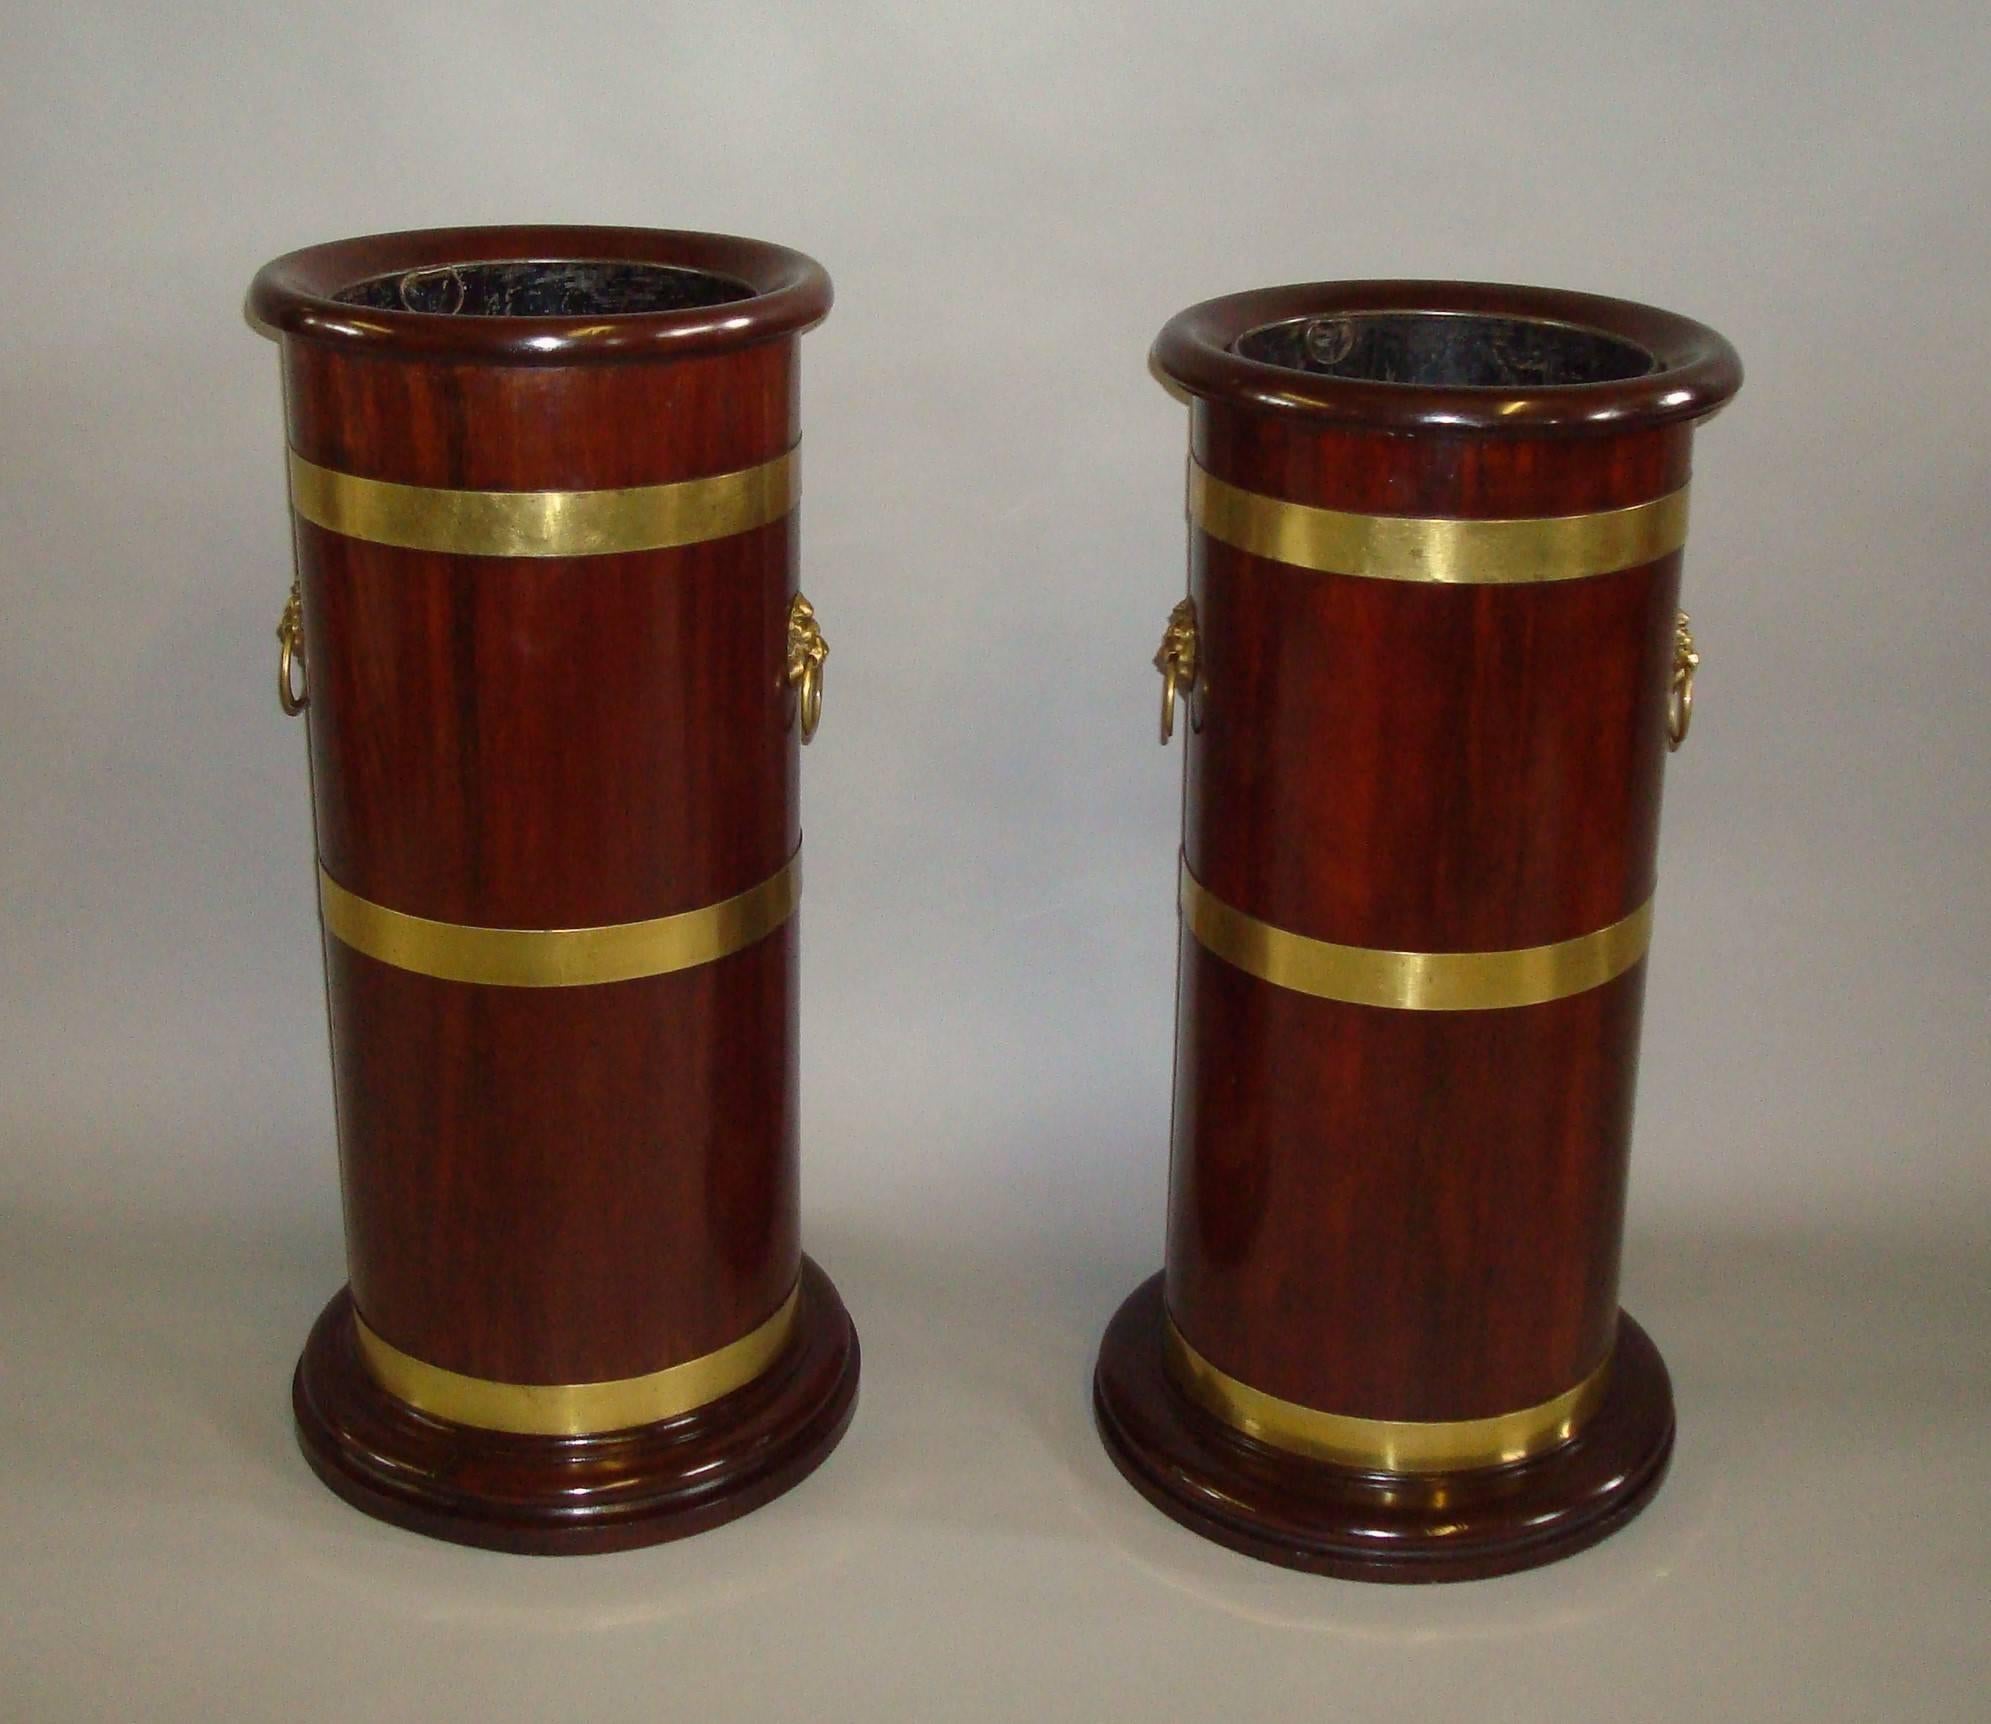 English Late 19th Century Pair of Stick or Umbrella Stands